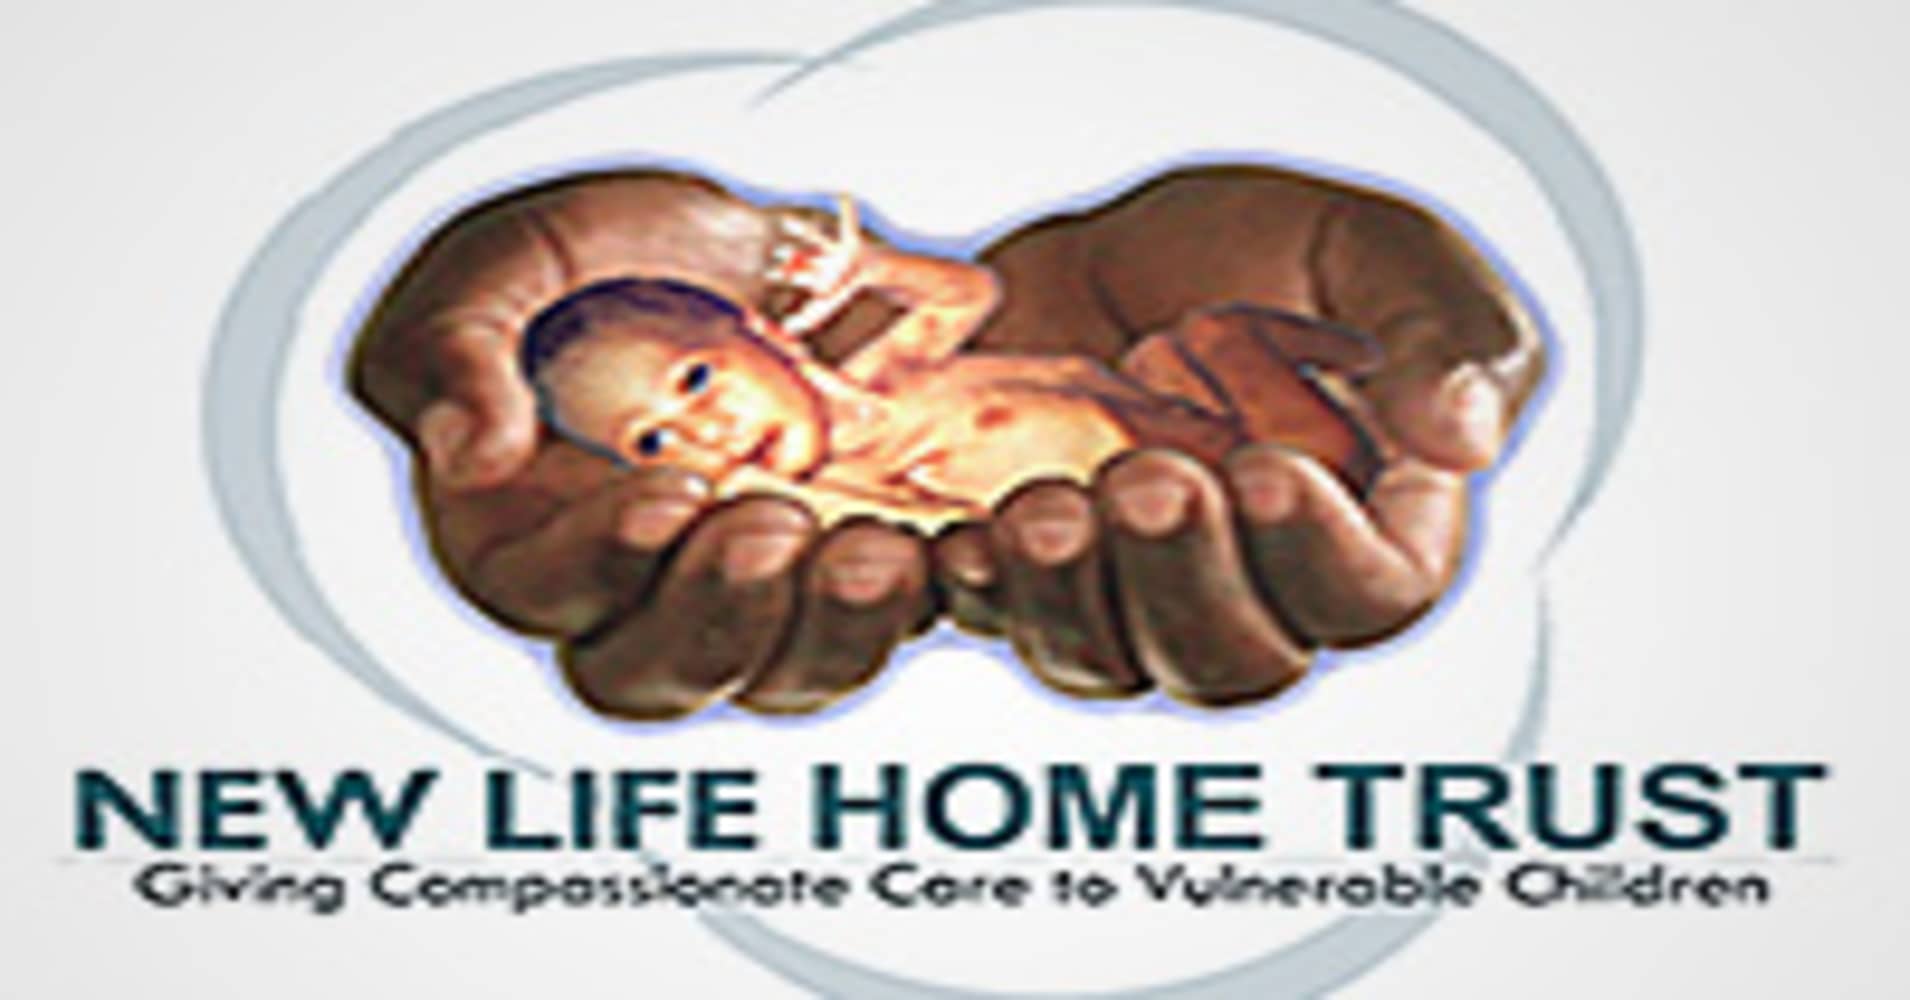 New Life Home Trust